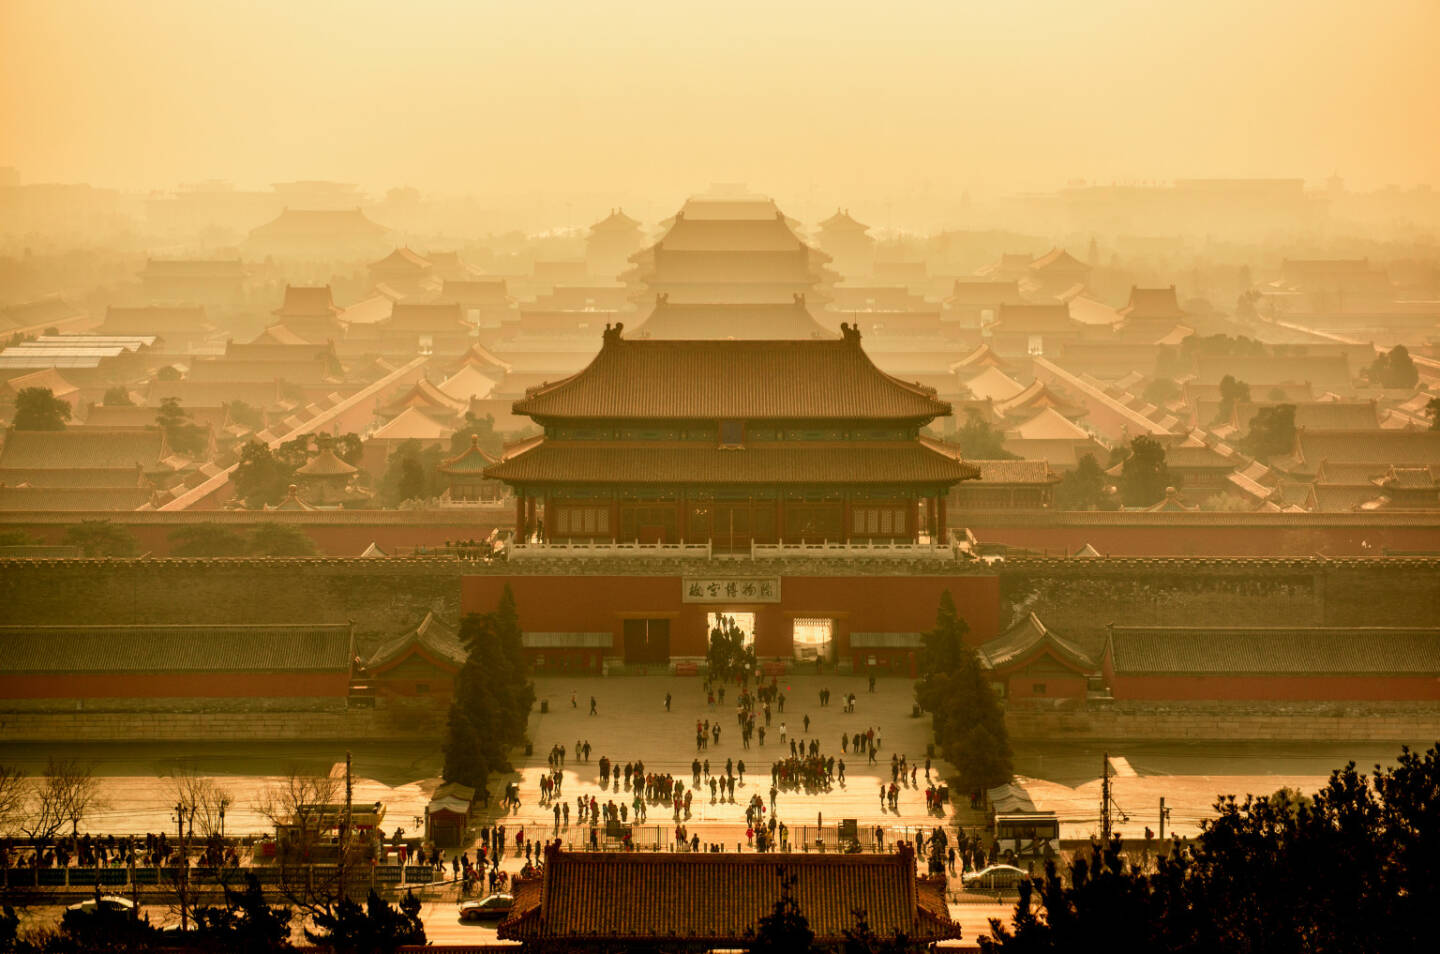 China, Peking, Verbotene Stadt und Kaiserpalast, http://www.shutterstock.com/de/pic-243064399/stock-photo-imperial-palace-in-beijing-view-from-above-china.html